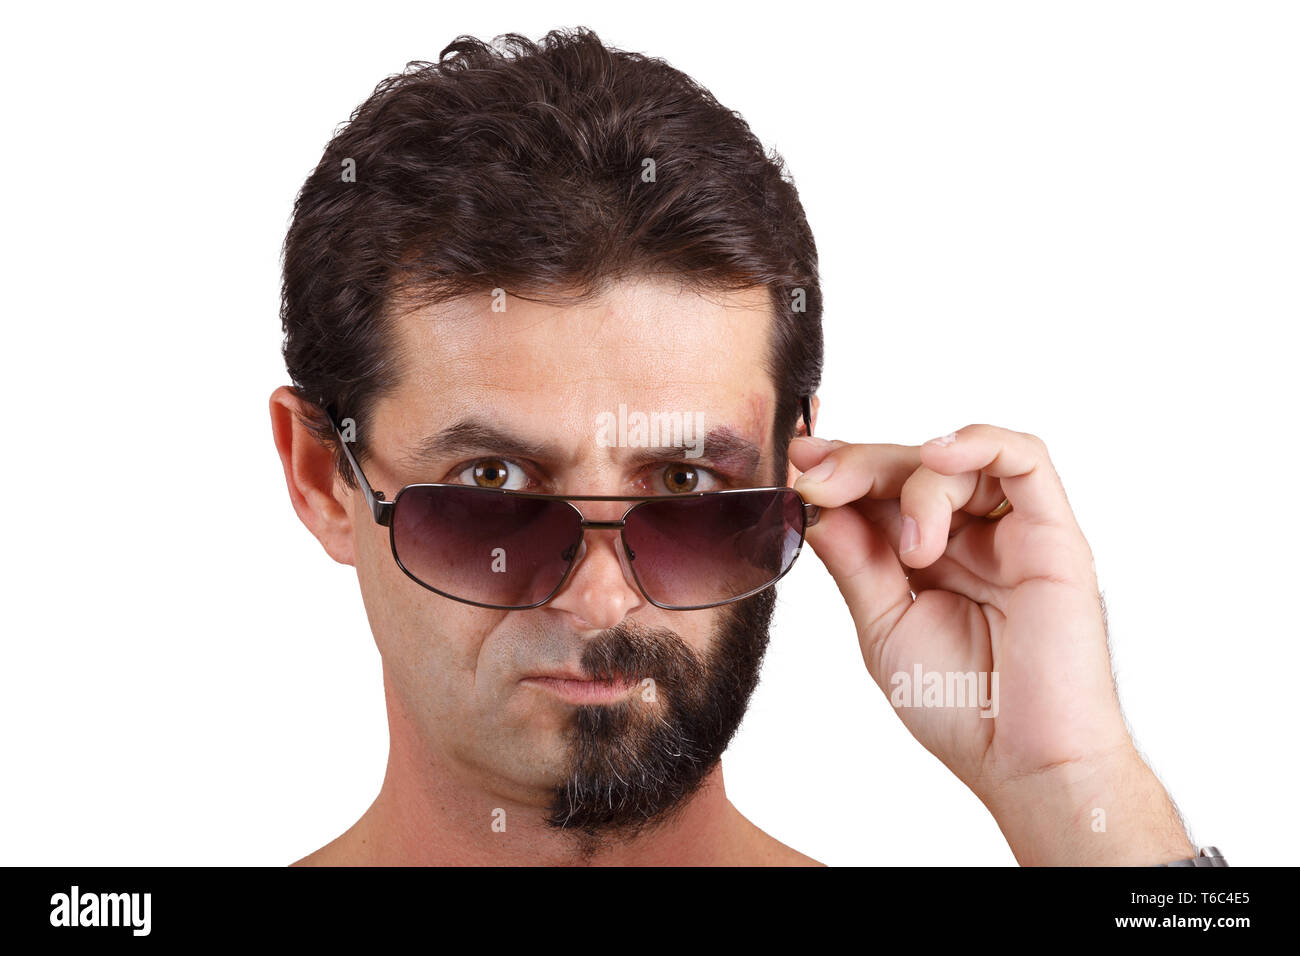 portrait of man with half shaved face Stock Photo